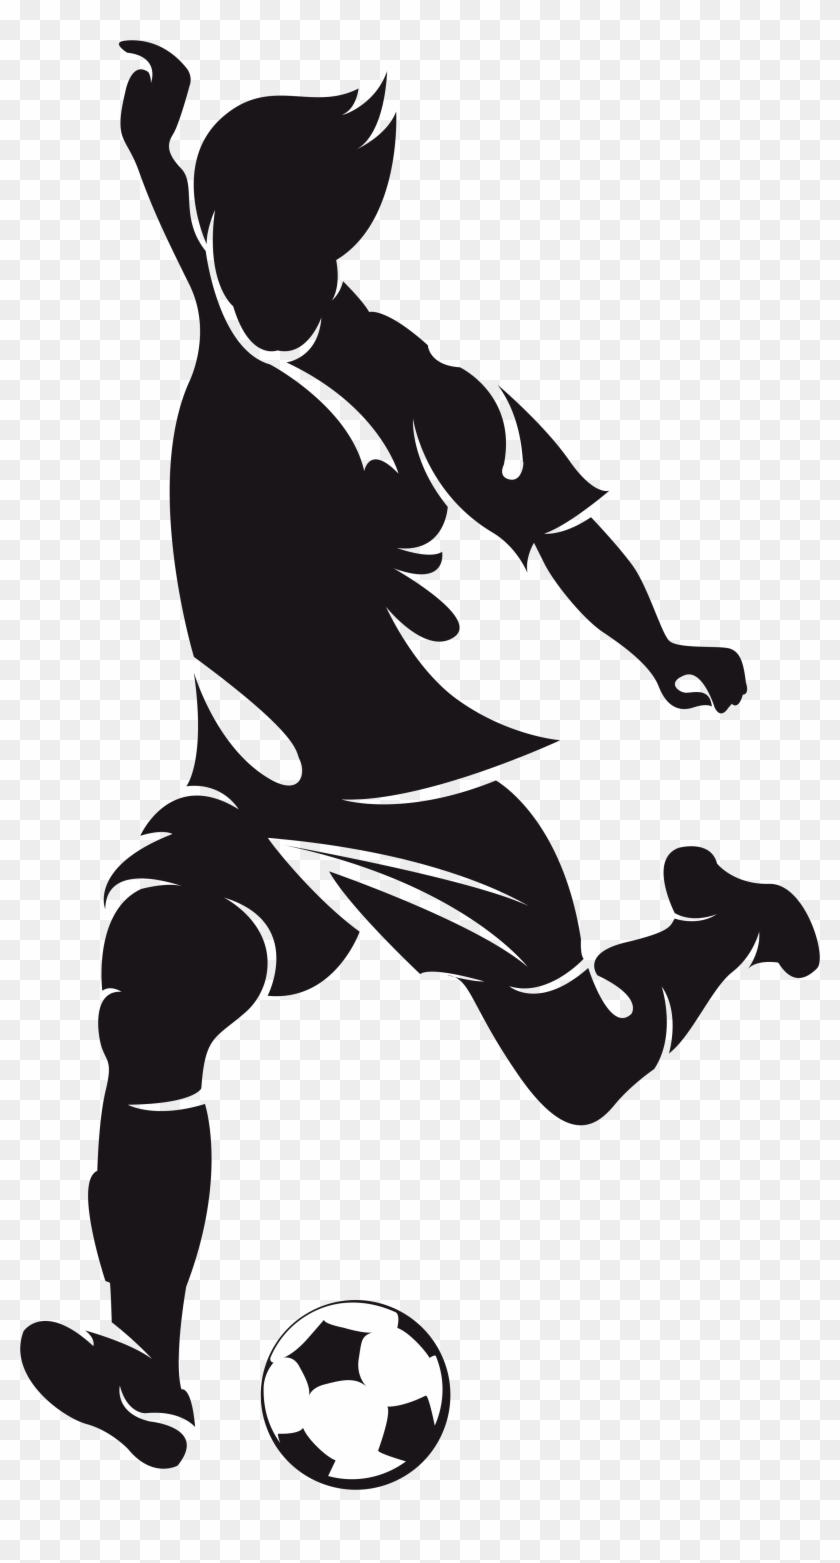 Football Kick Image Freeuse Download Football Player Logo Png Transparent Png 2606x4726 342606 Pngfind